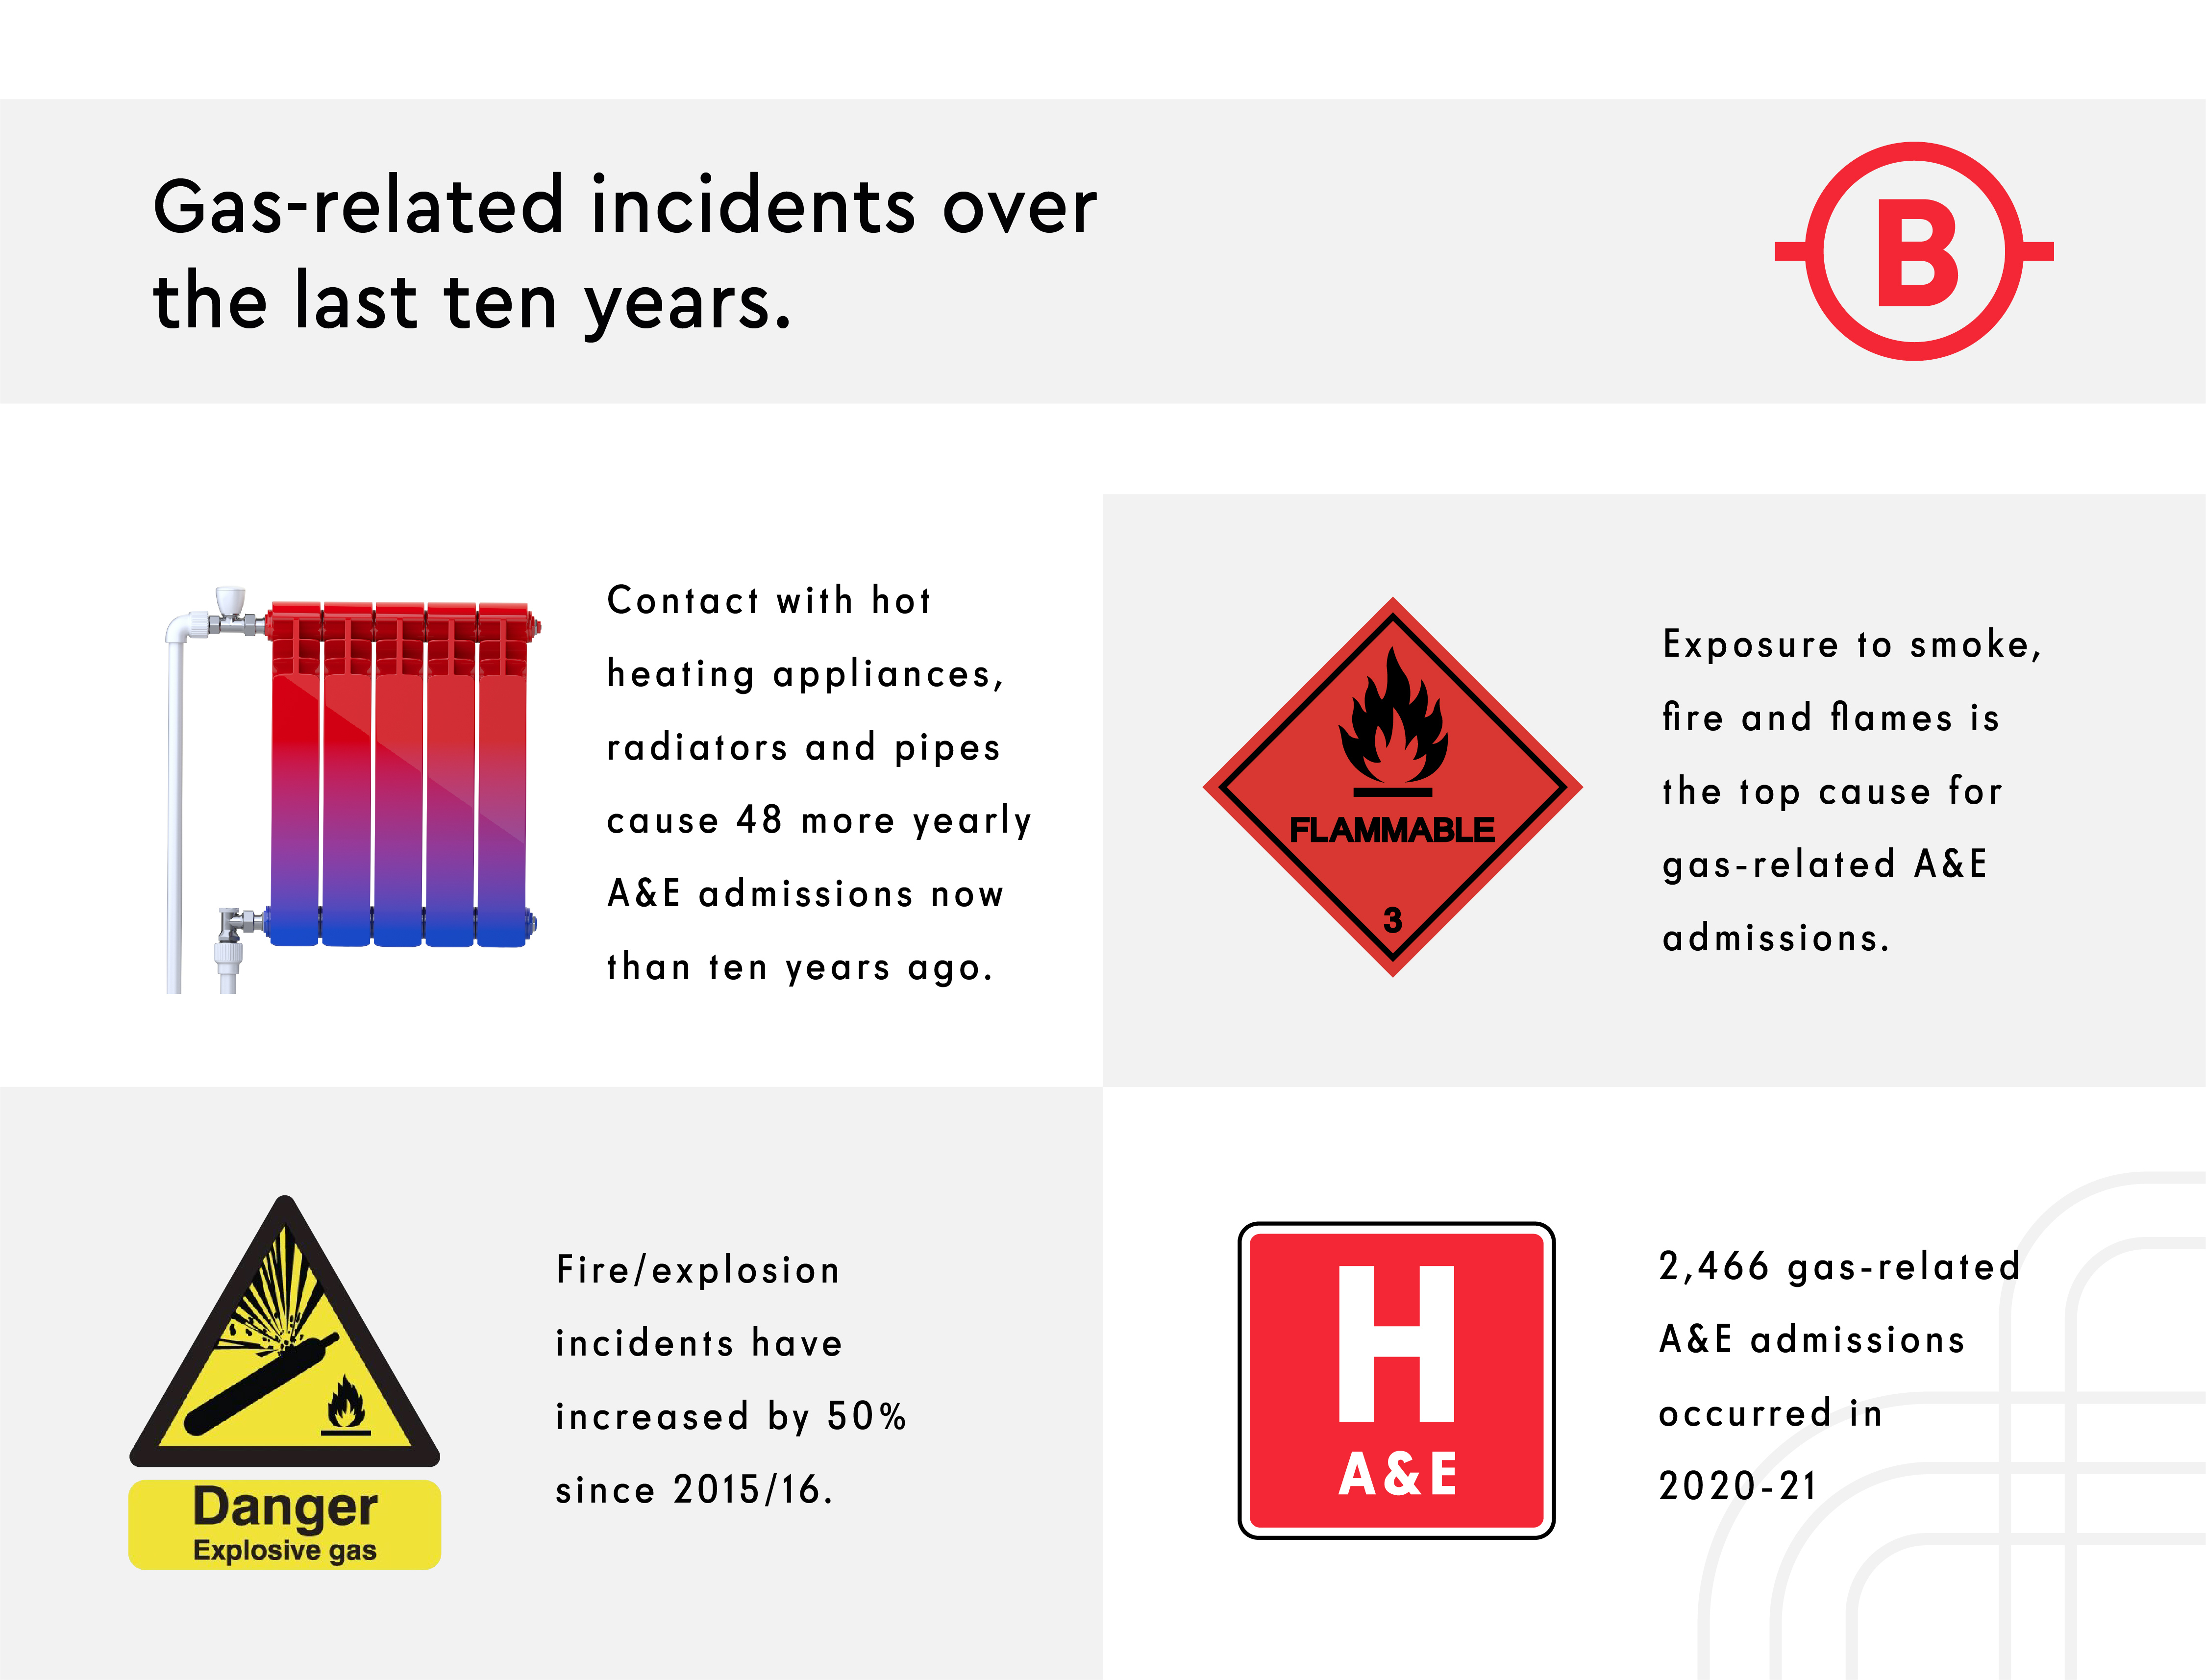 A graphic showing gas related incidents over the last 10 years